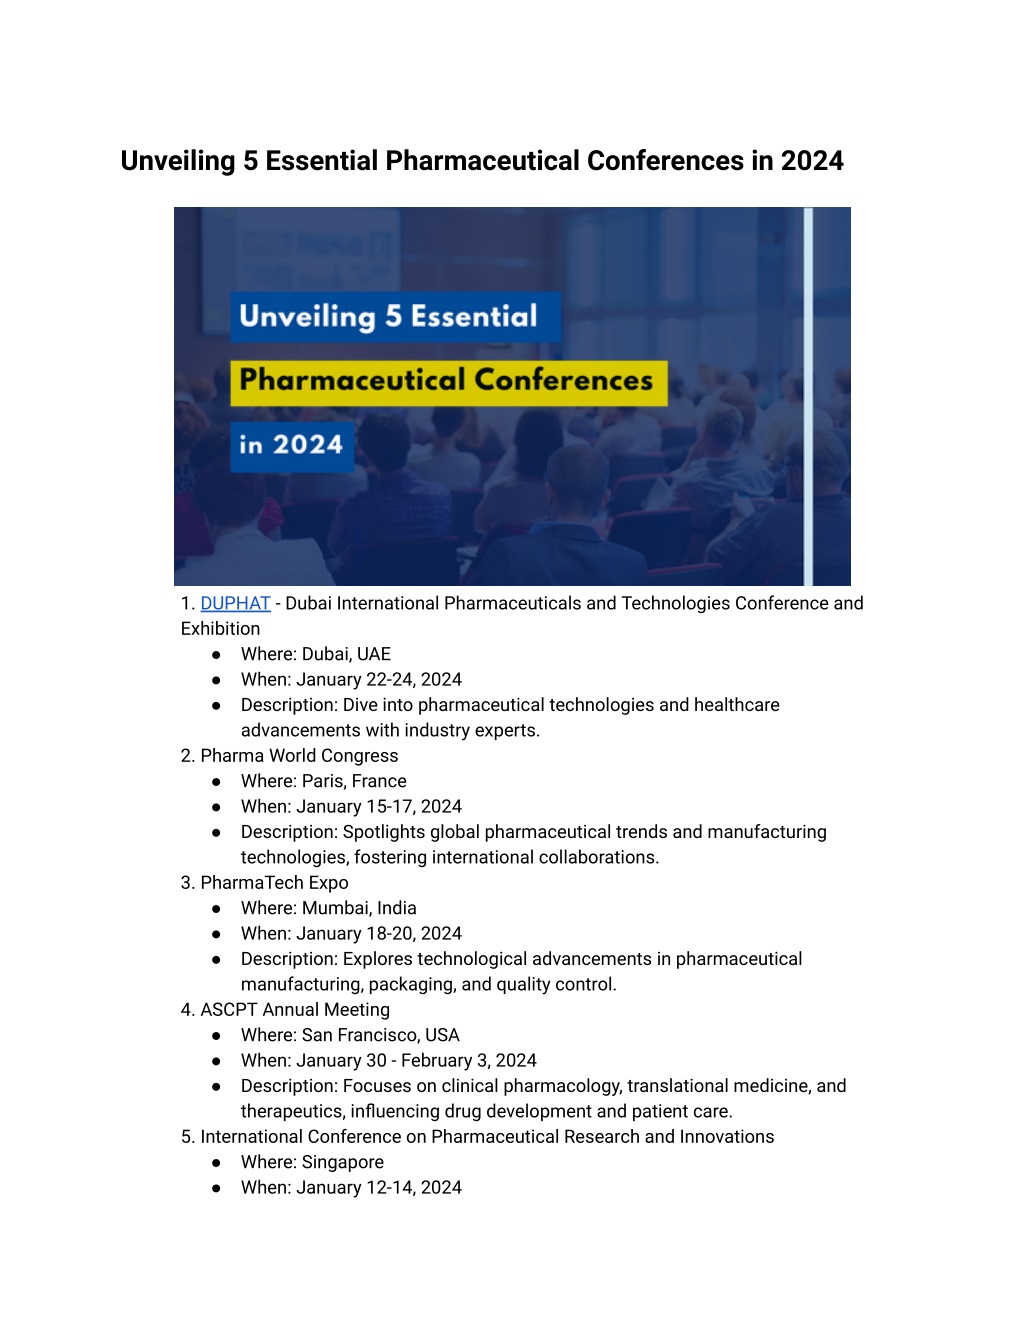 PPT Unveiling 5 Essential Pharmaceutical Conferences in 2024